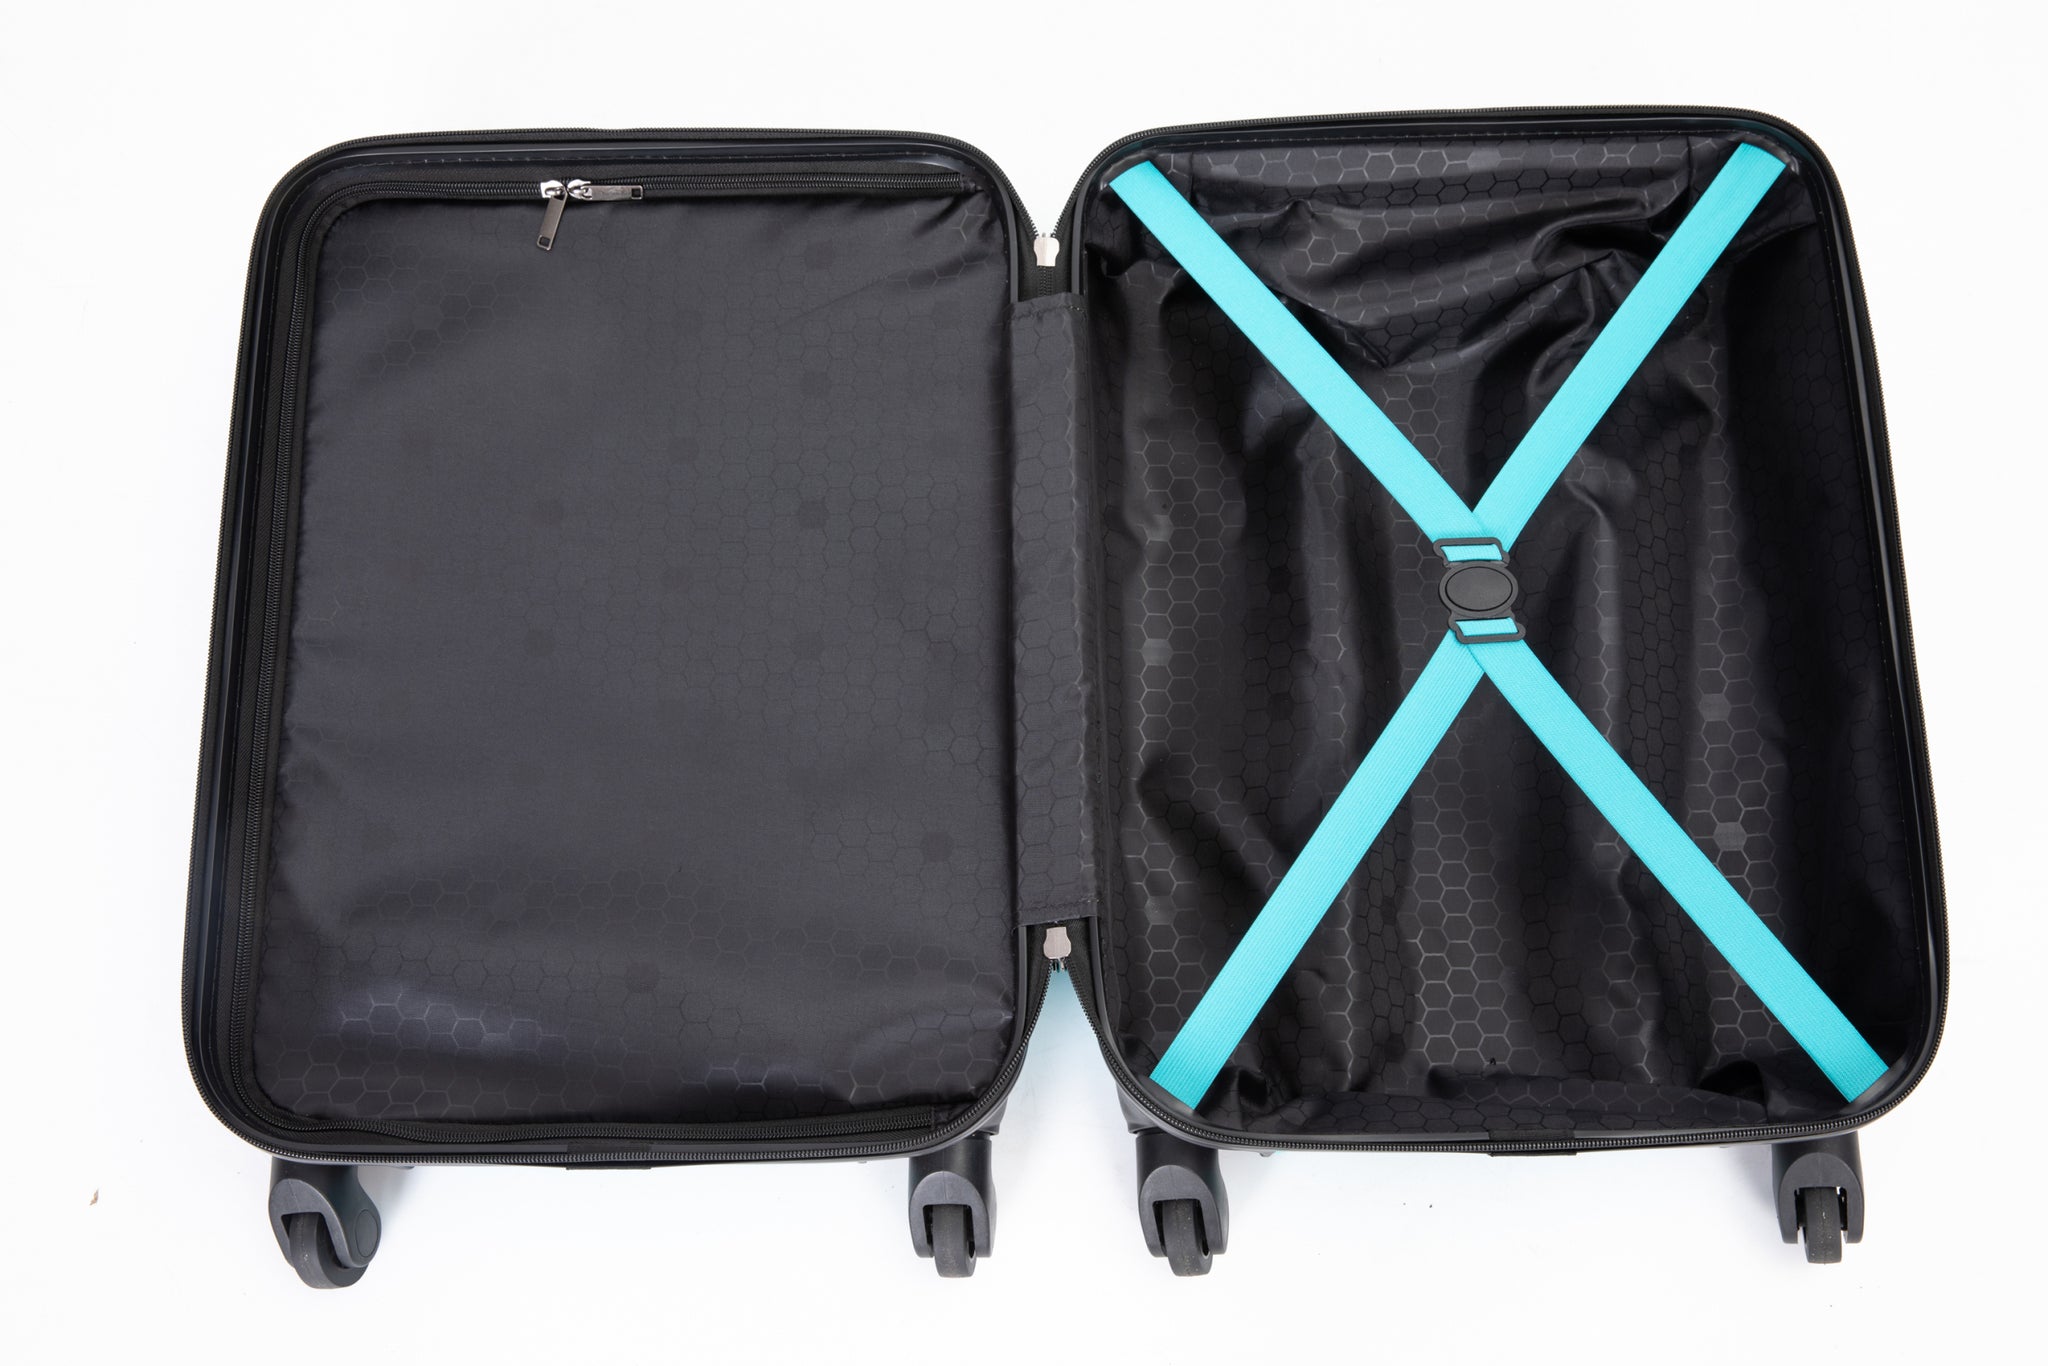 20" Carry on Luggage Lightweight Suitcase, Spinner turquoise-abs